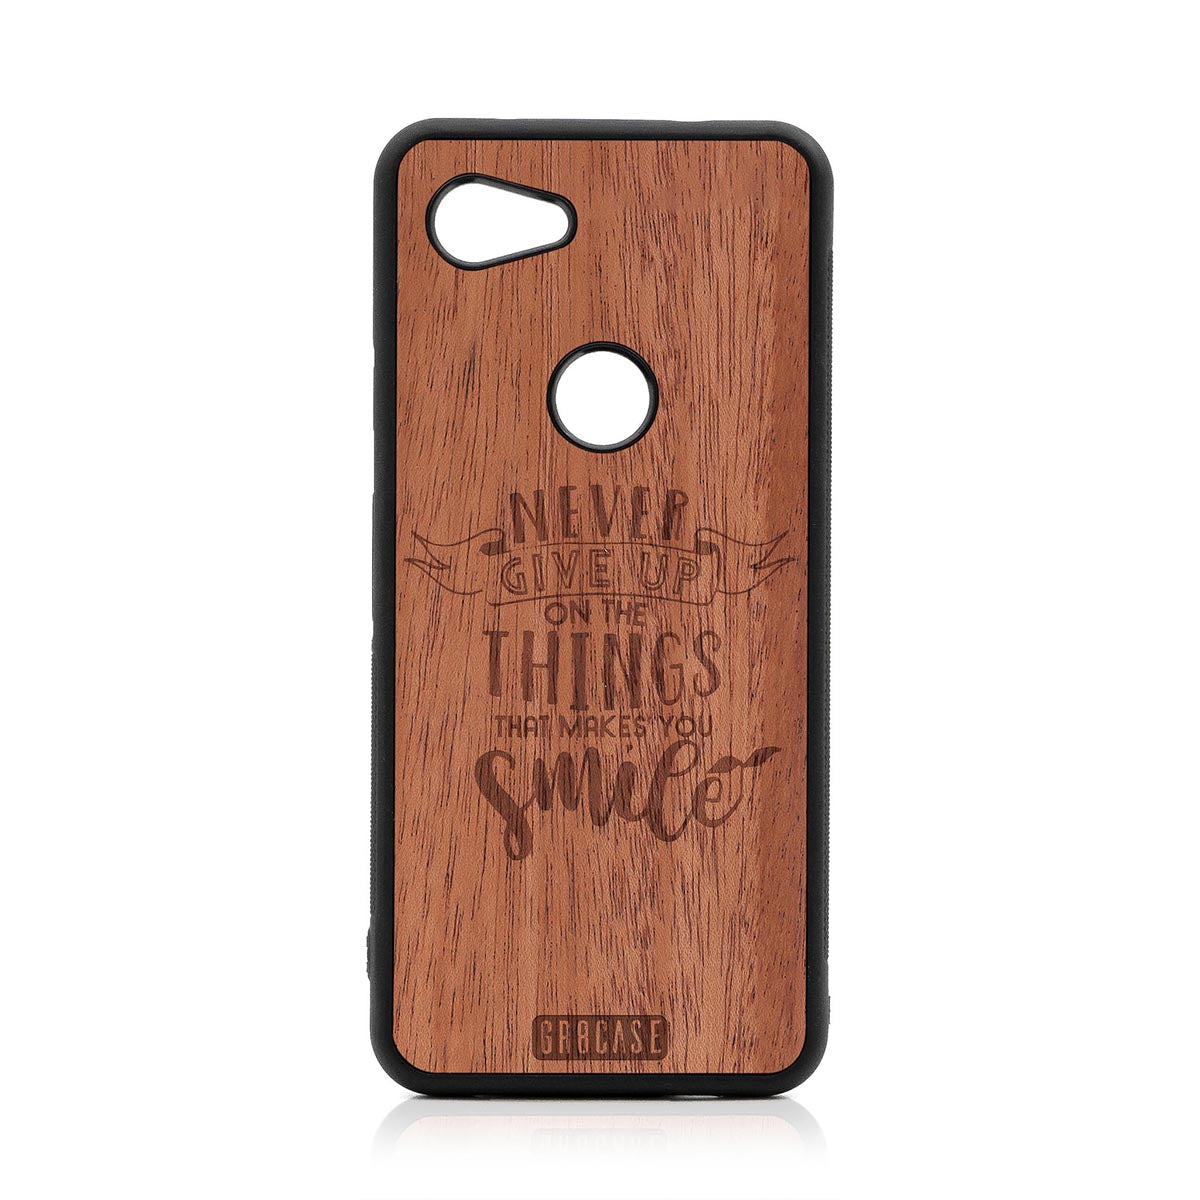 Never Give Up On The Things That Makes You Smile Design Wood Case Google Pixel 3A XL by GR8CASE